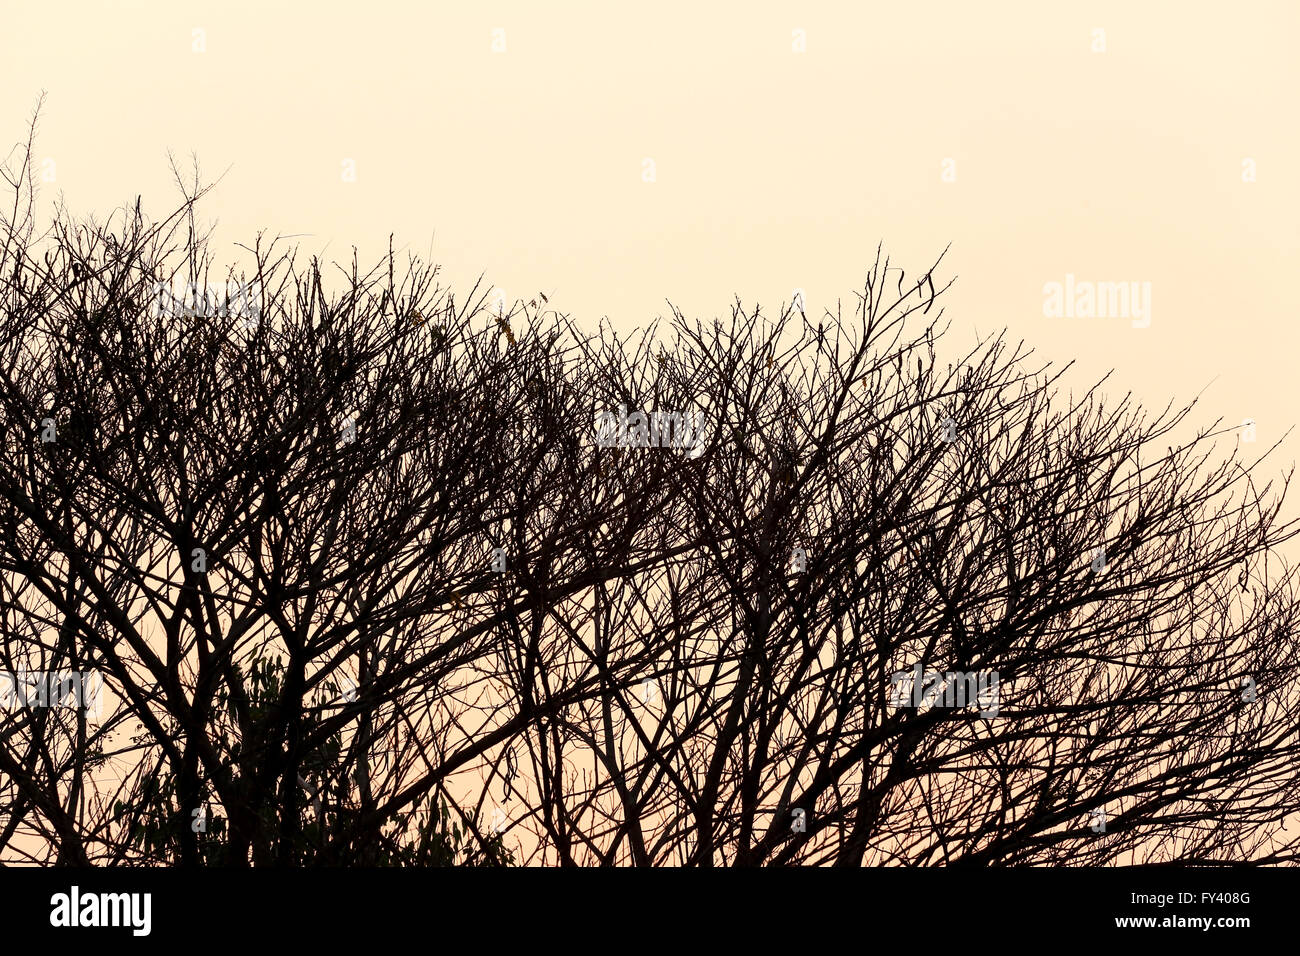 tree of silhouette style on sunset in the evening. Stock Photo